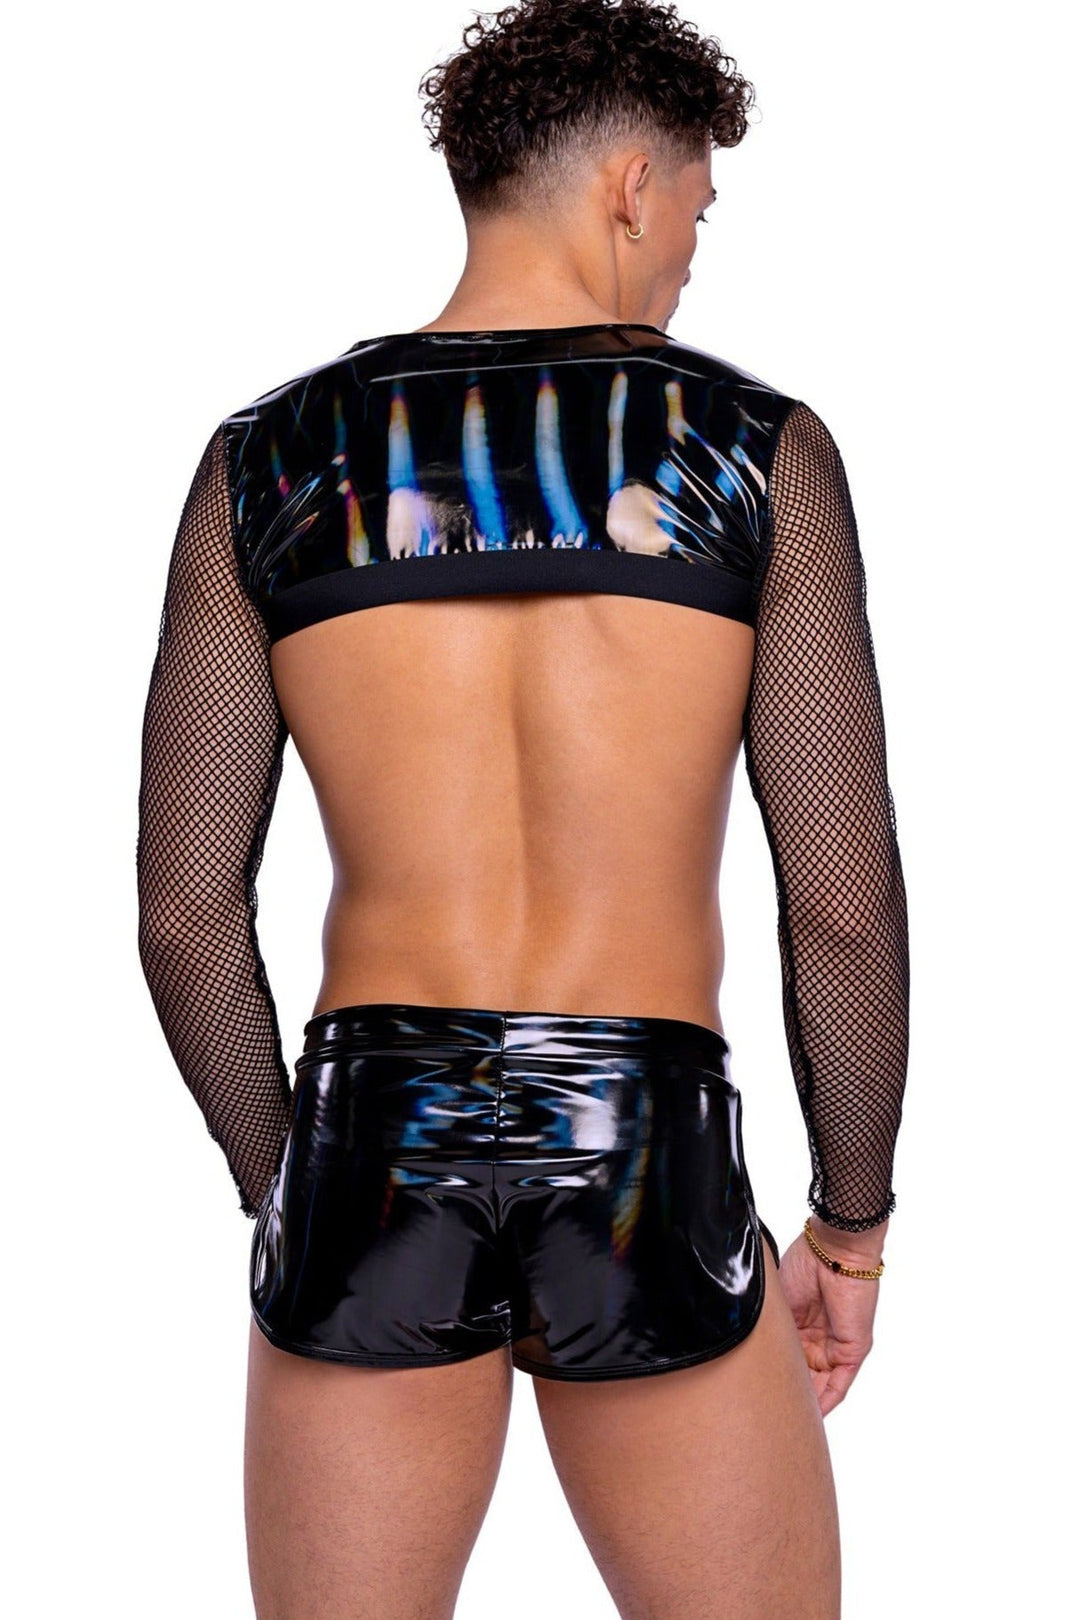 Vinyl with Iridescent Print Long Sleeved Fishnet Top with Zip-Up Closure